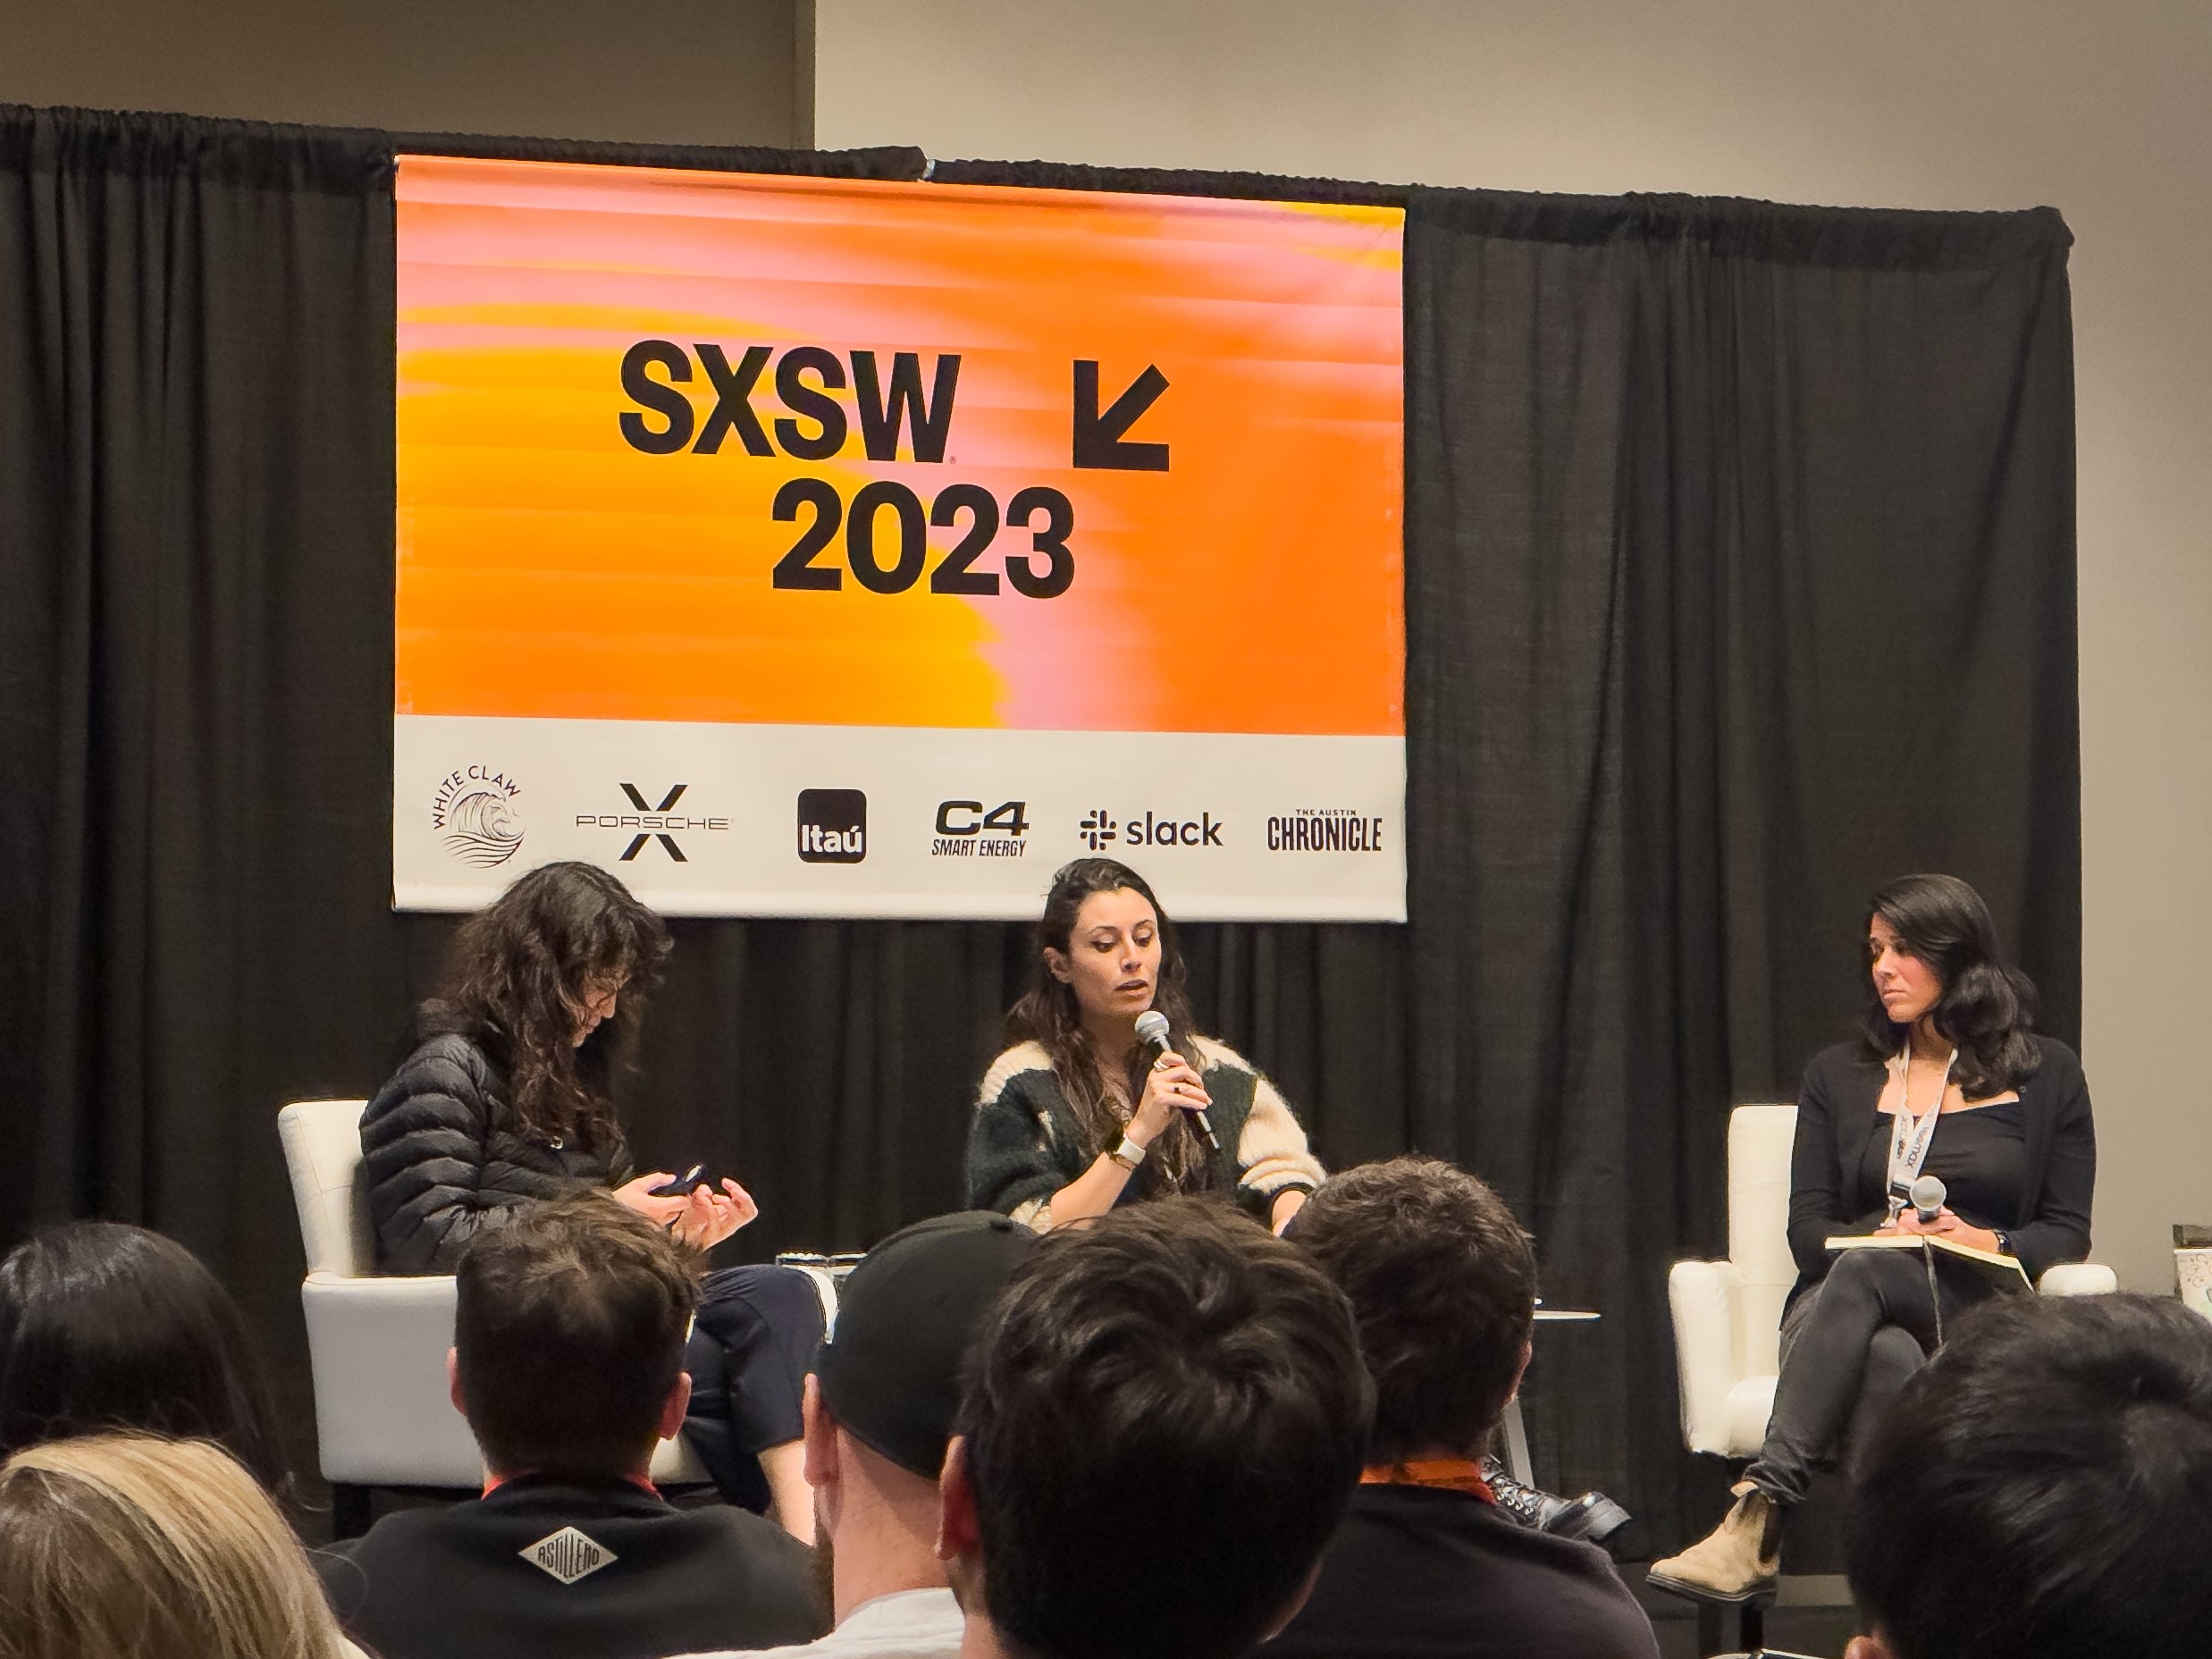 SXSW 2023 Celine Halioua and Laura Deming speaking on a panel